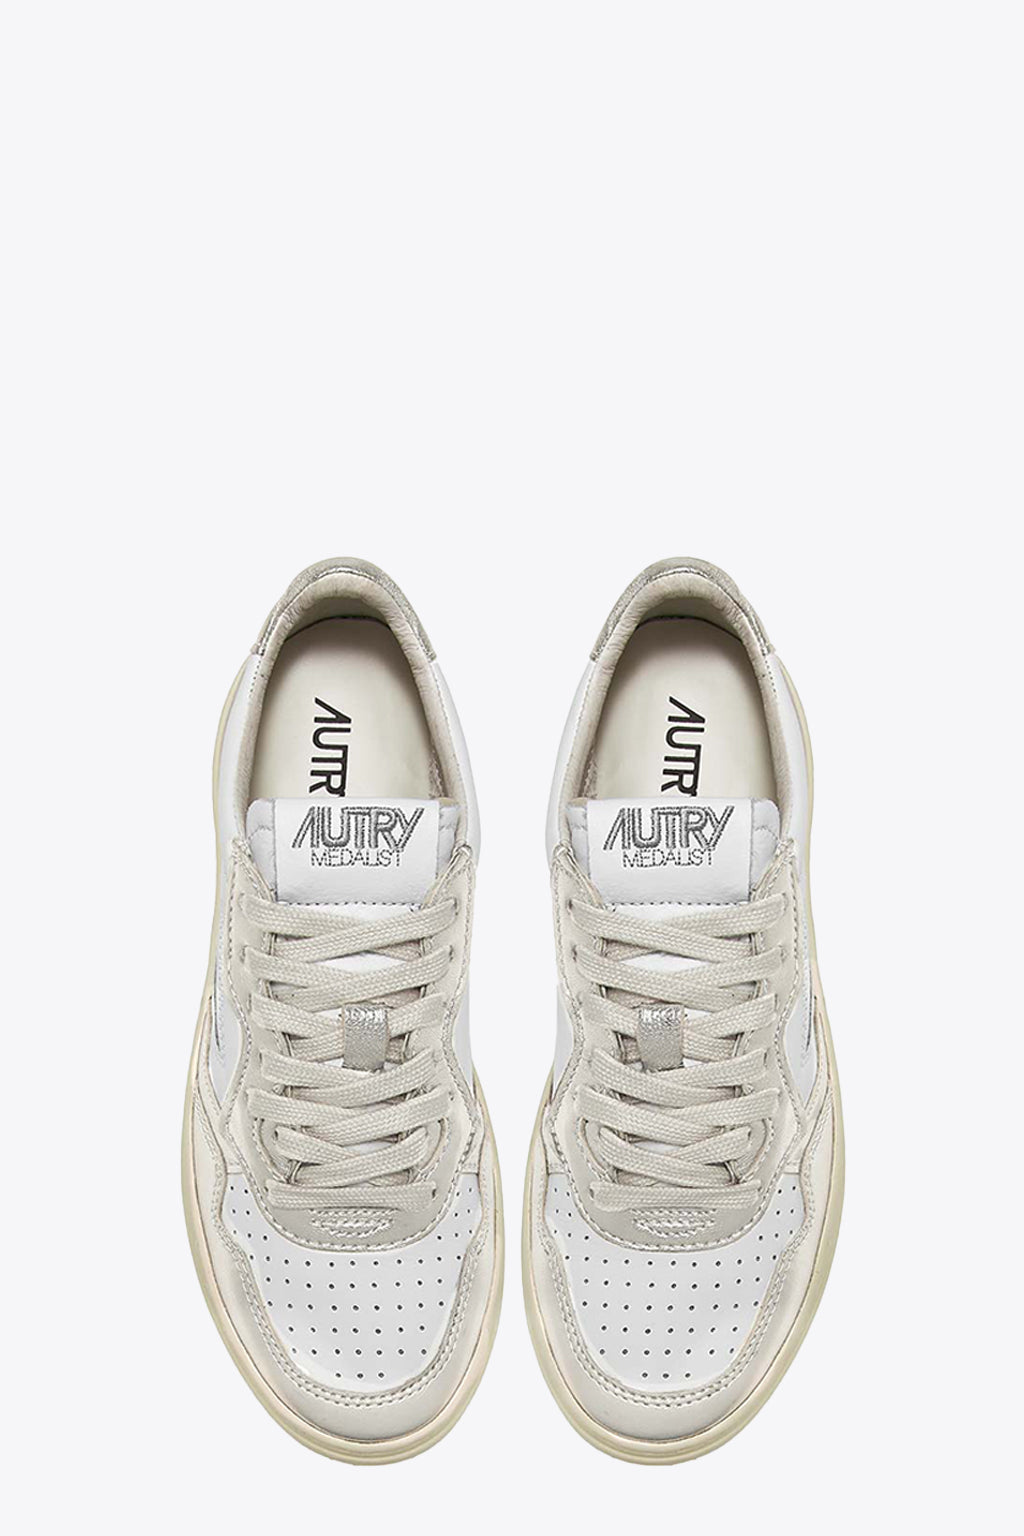 alt-image__White-and-silver-leather-low-sneaker---Medalist